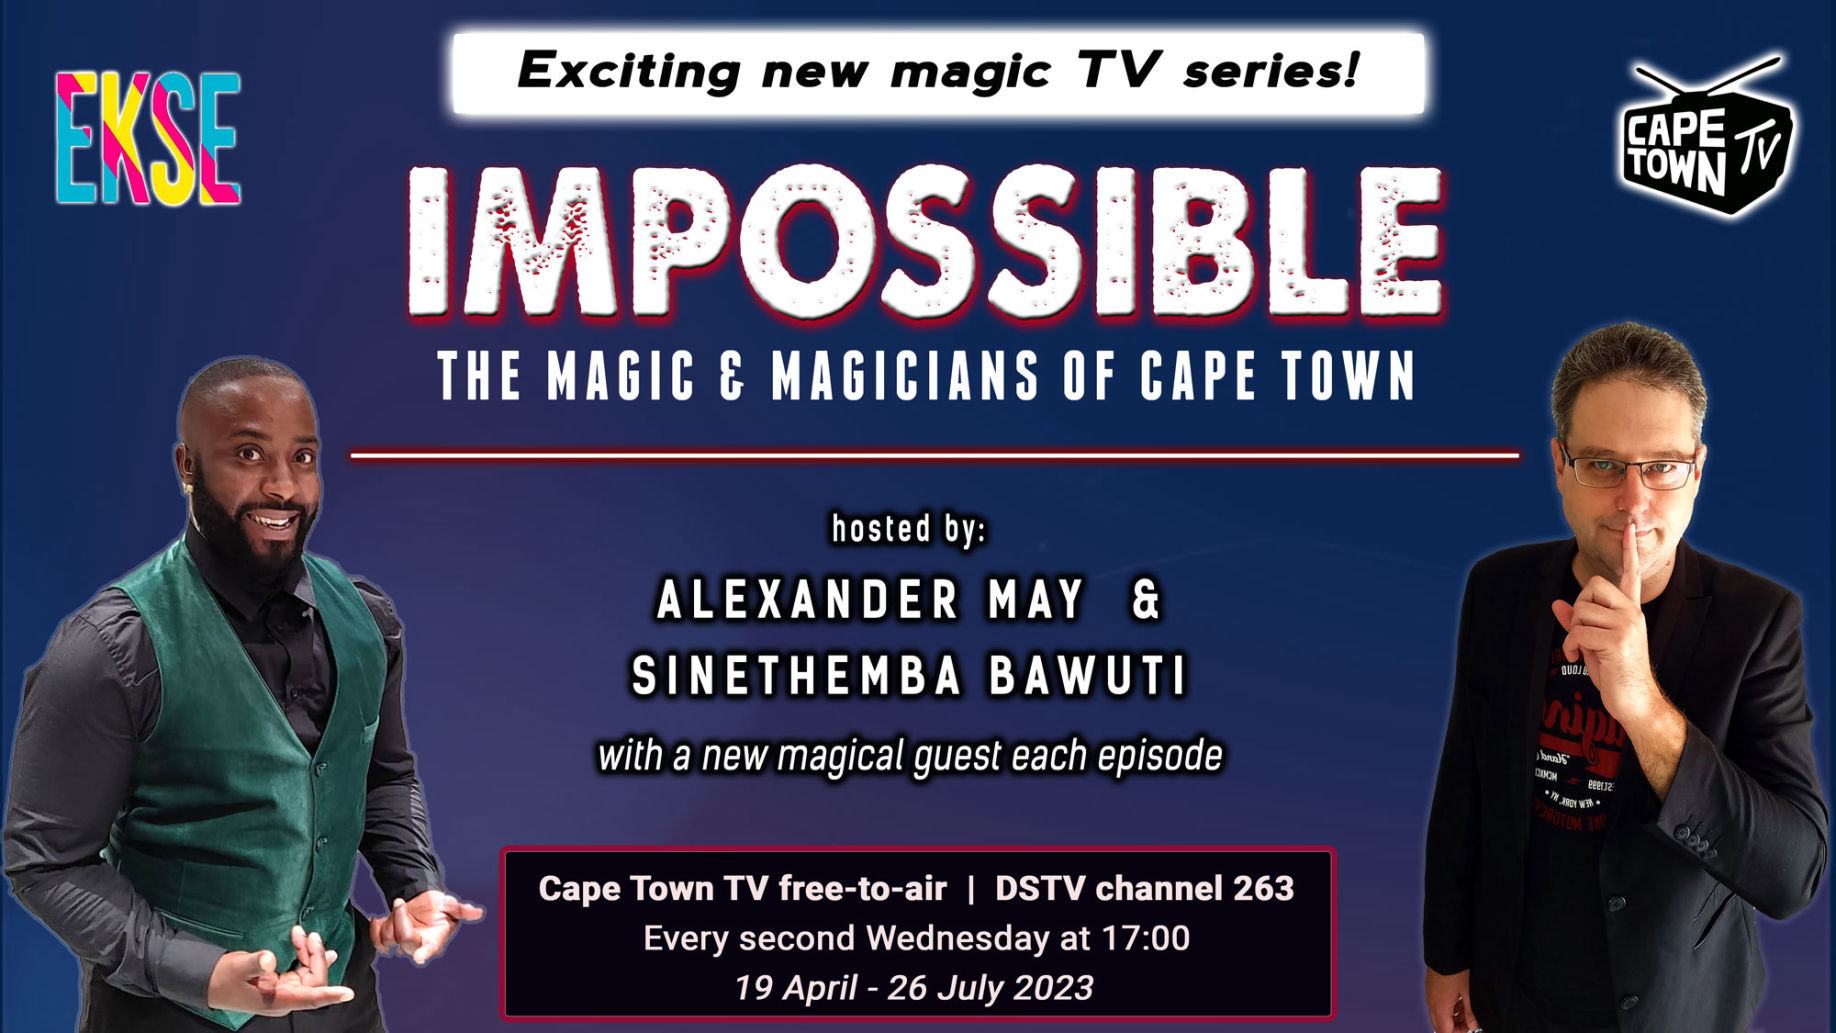 Cape Town magician Alexander May